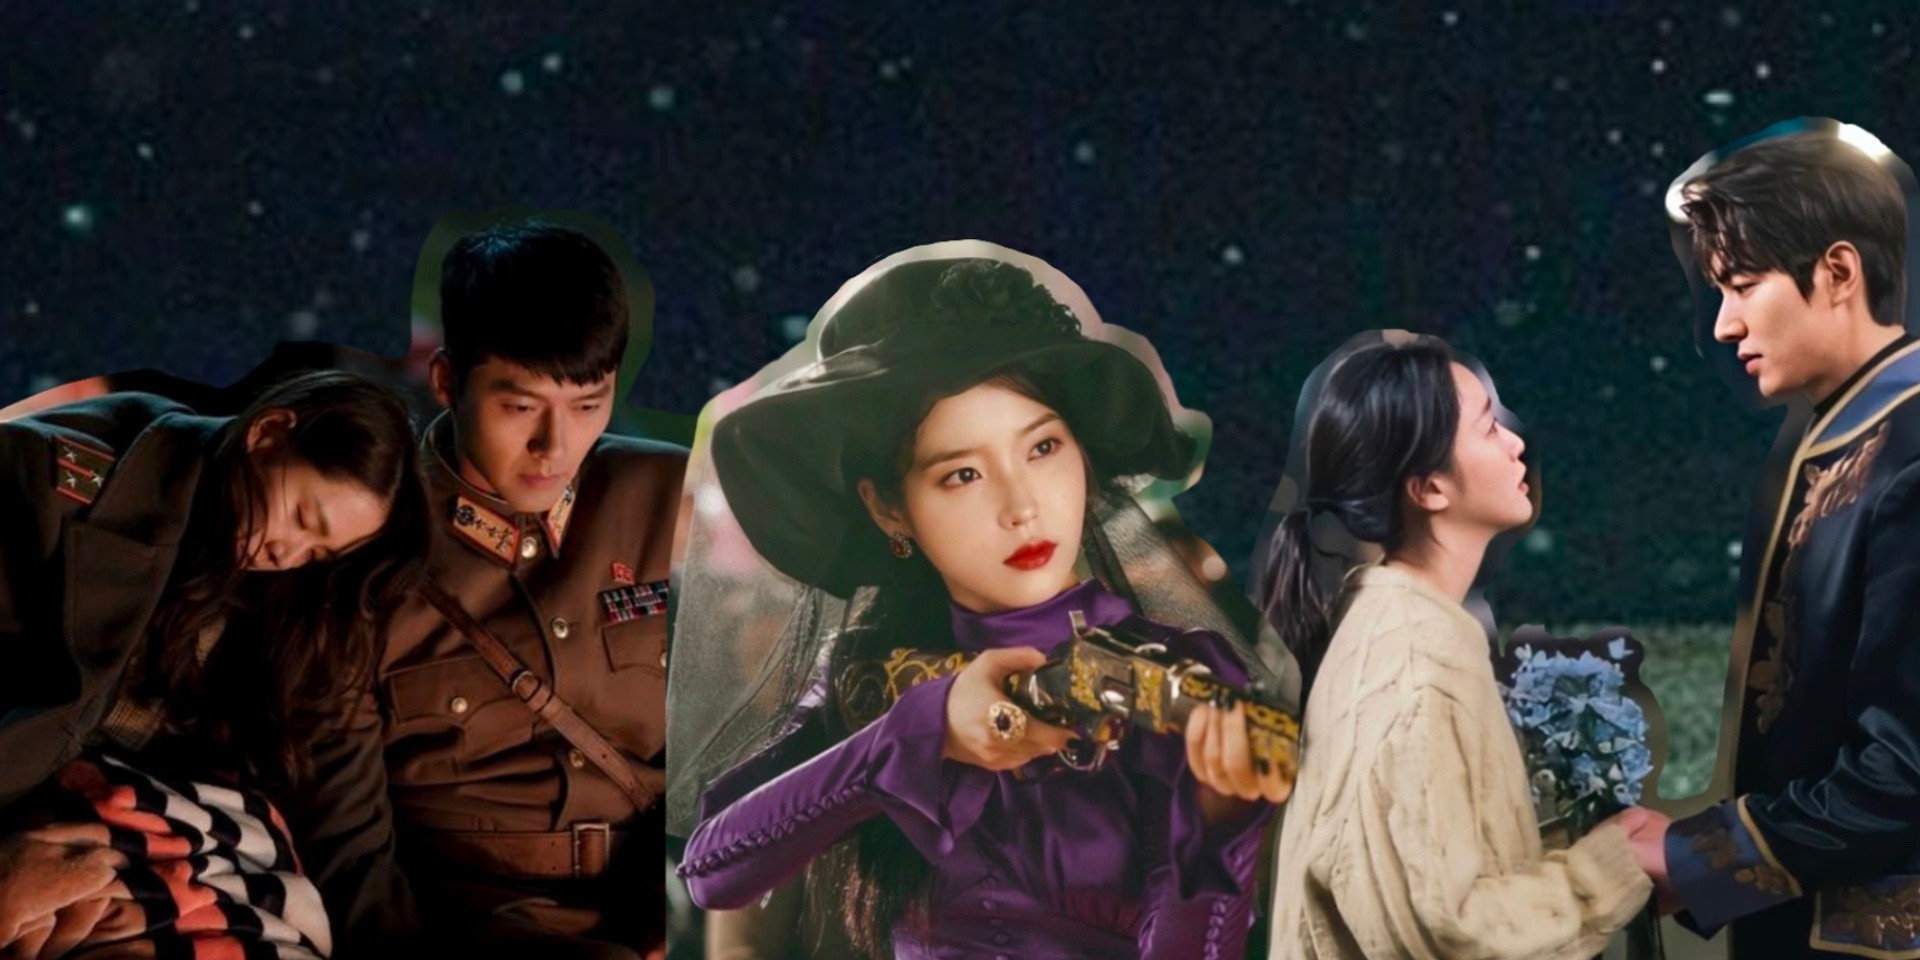 10 K-drama OST picks from Crash Landing on You, Hotel Del Luna, The King: Eternal Monarch, and more